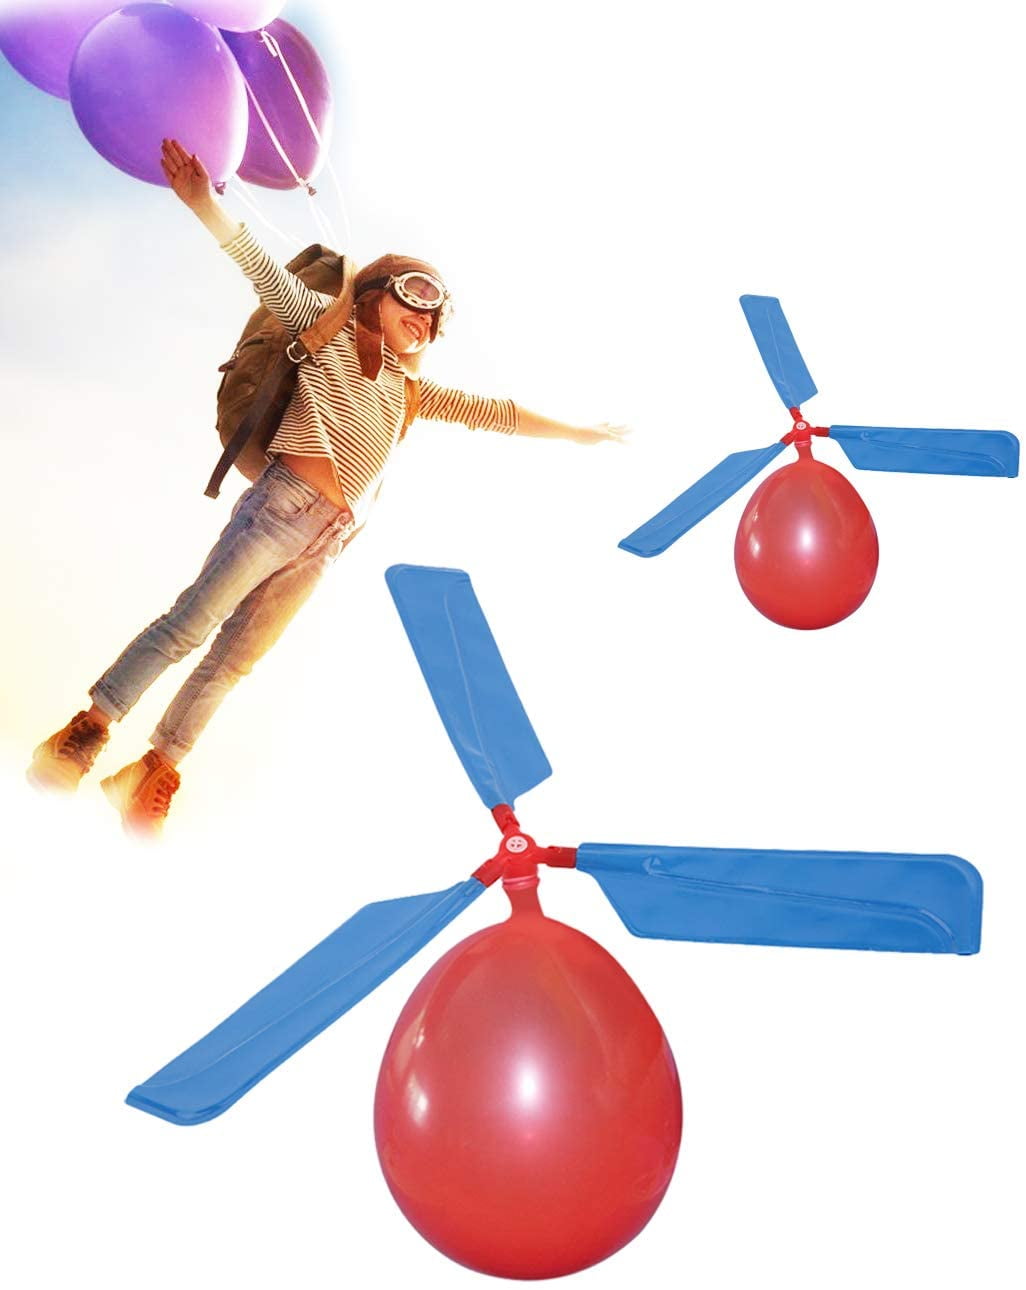 BALLOON HELICOPTER FLYING TOY BOYS GIRLS GIFT GADGET BIRTHDAY PARTY BAG FILLERS 